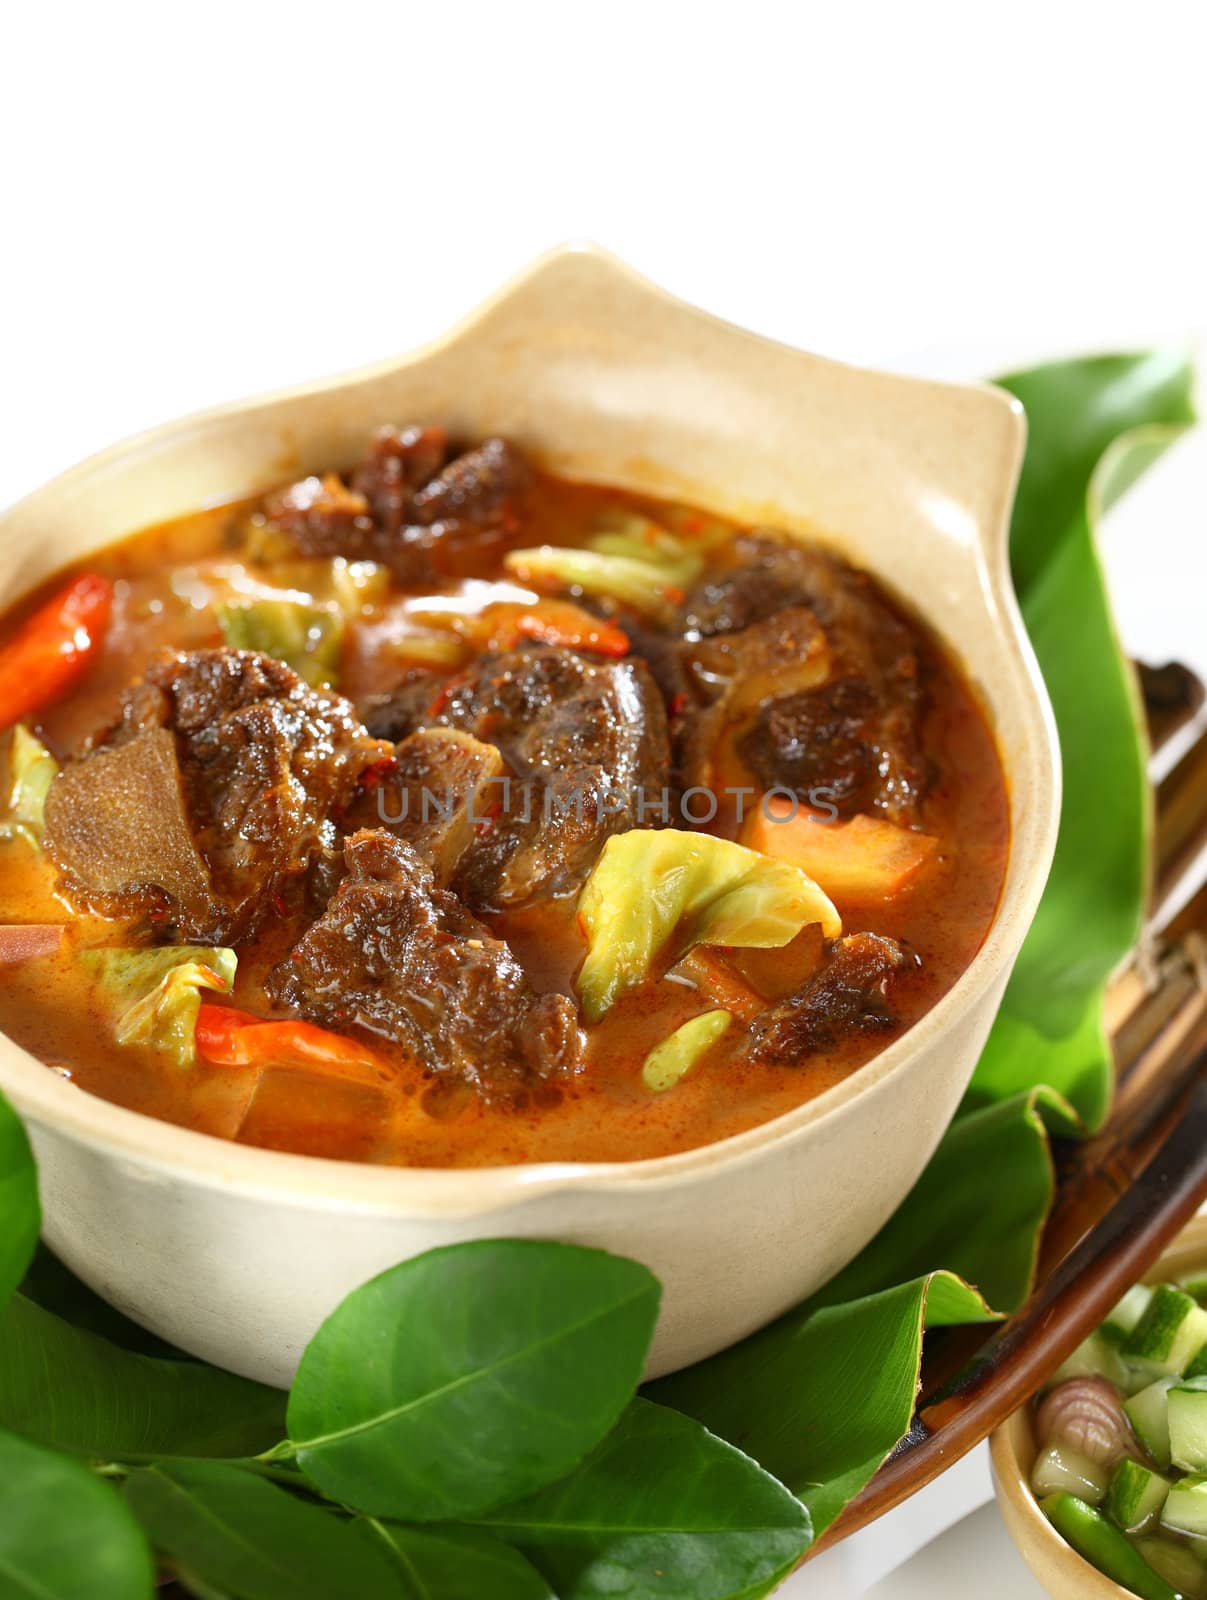 Tongseng served with rice. A Javanese style spicy curry stew with goat meat with bone still attached.